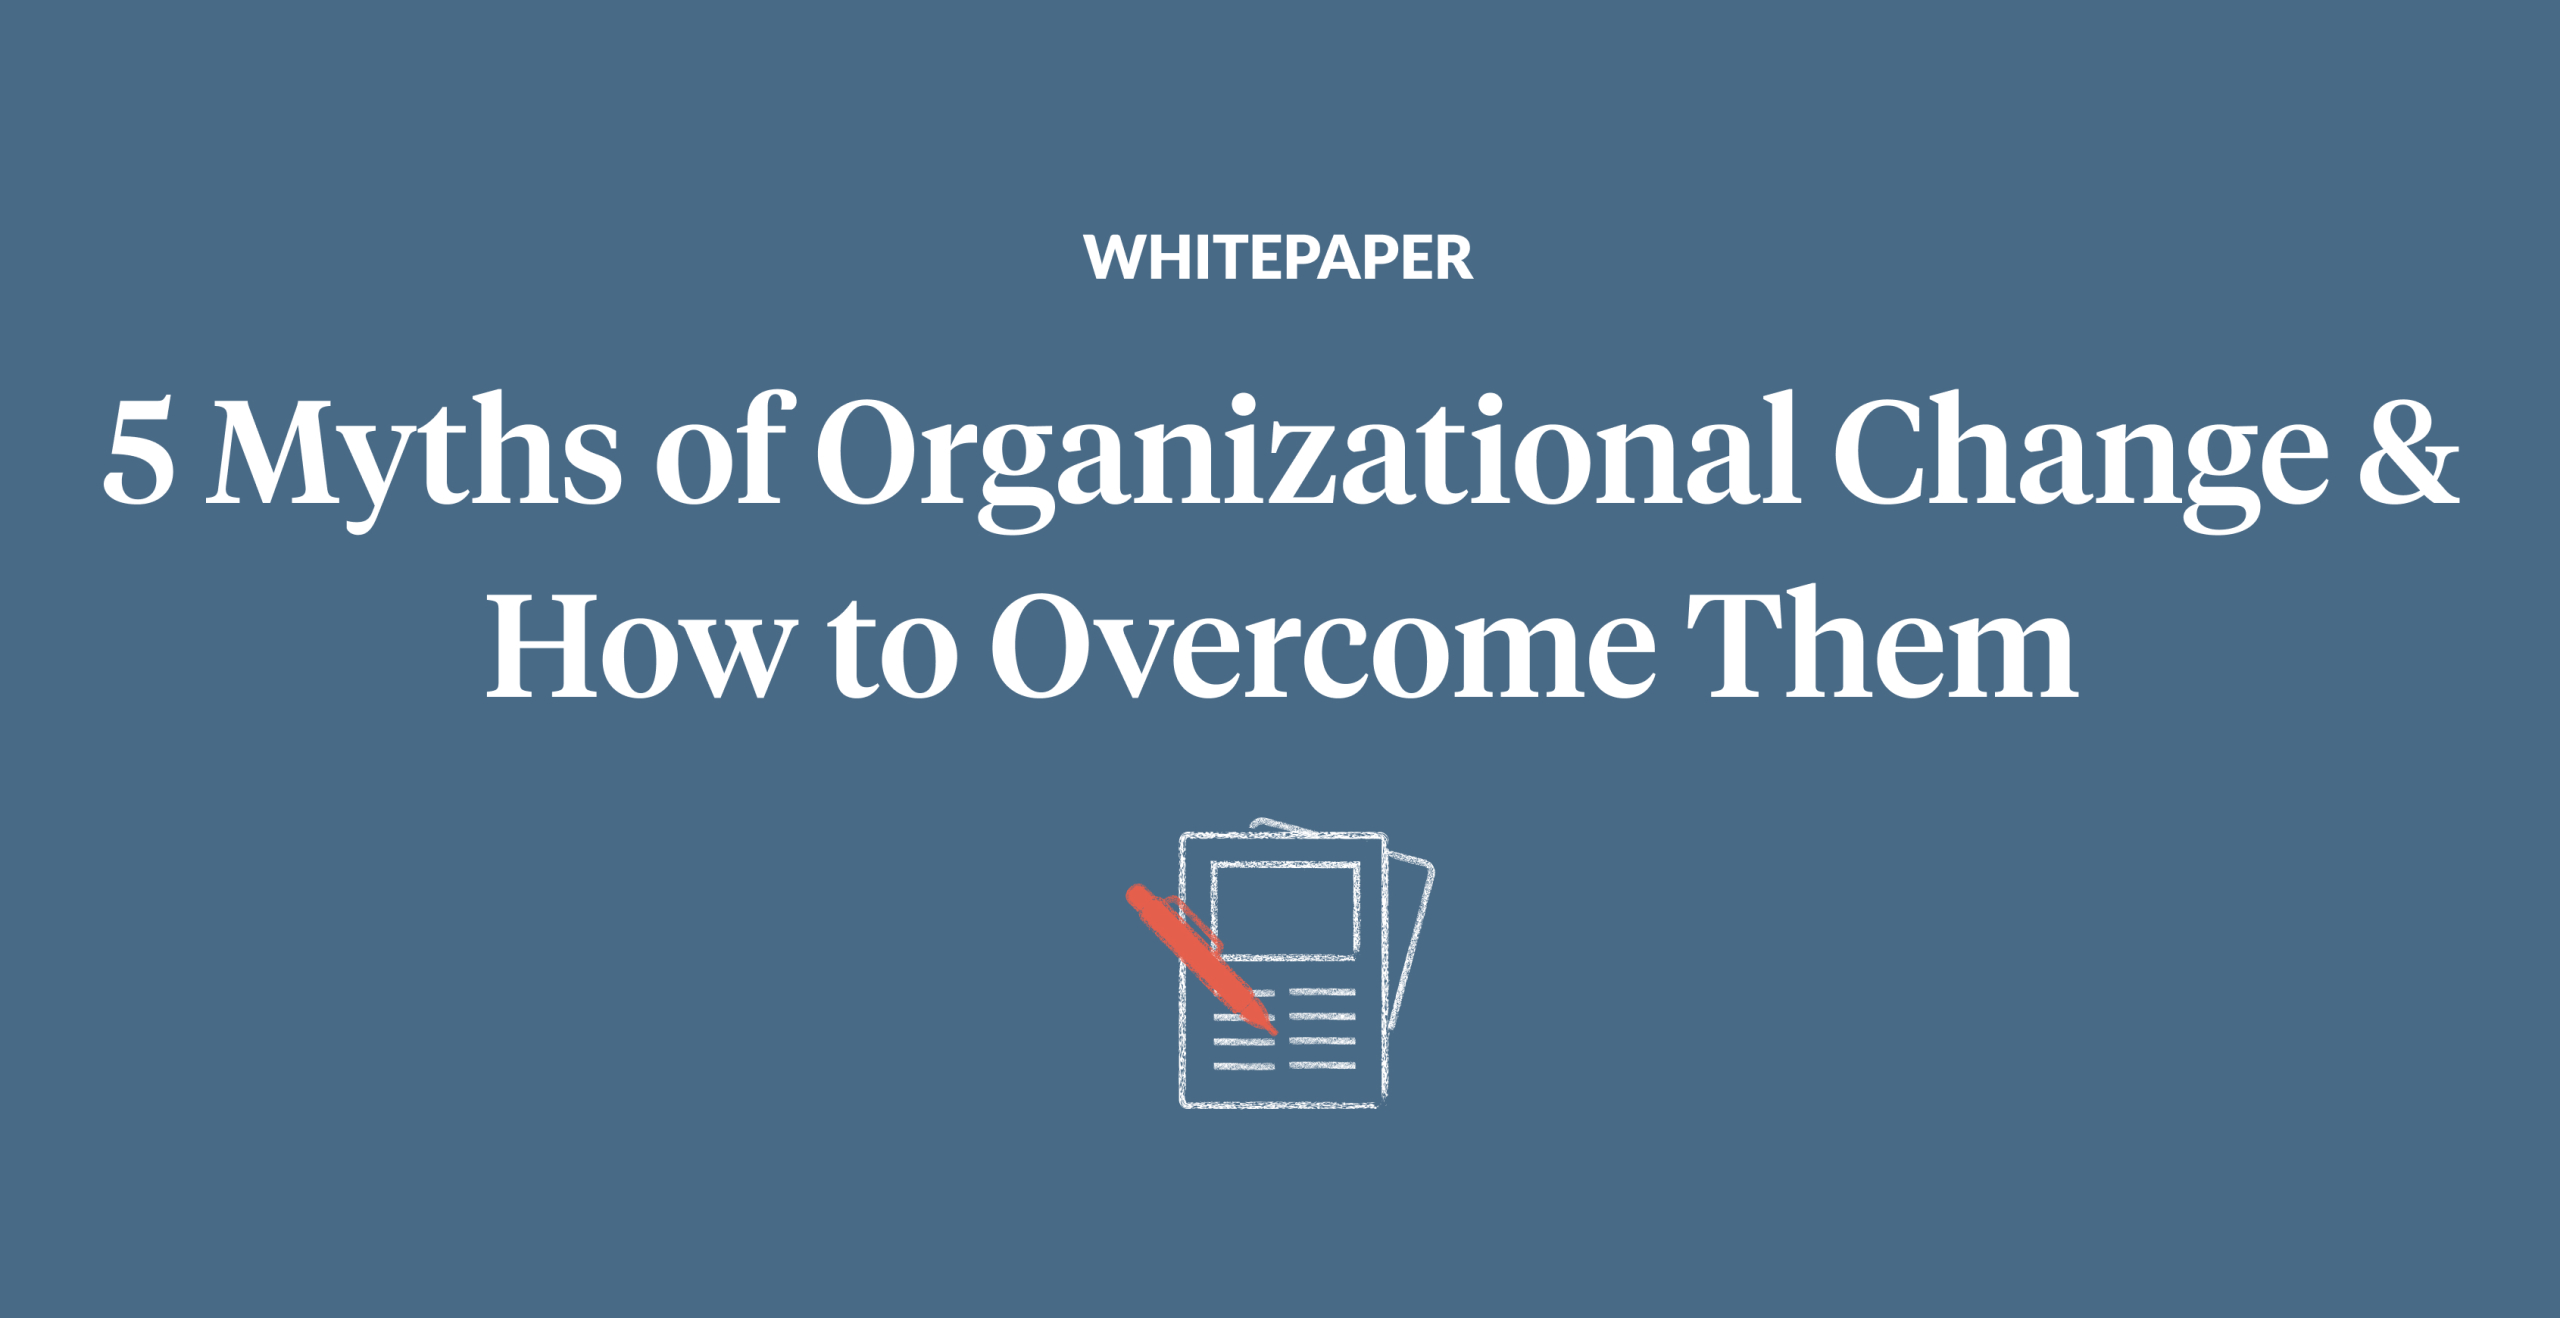 5 Myths of Organizational Change & How to Overcome Them